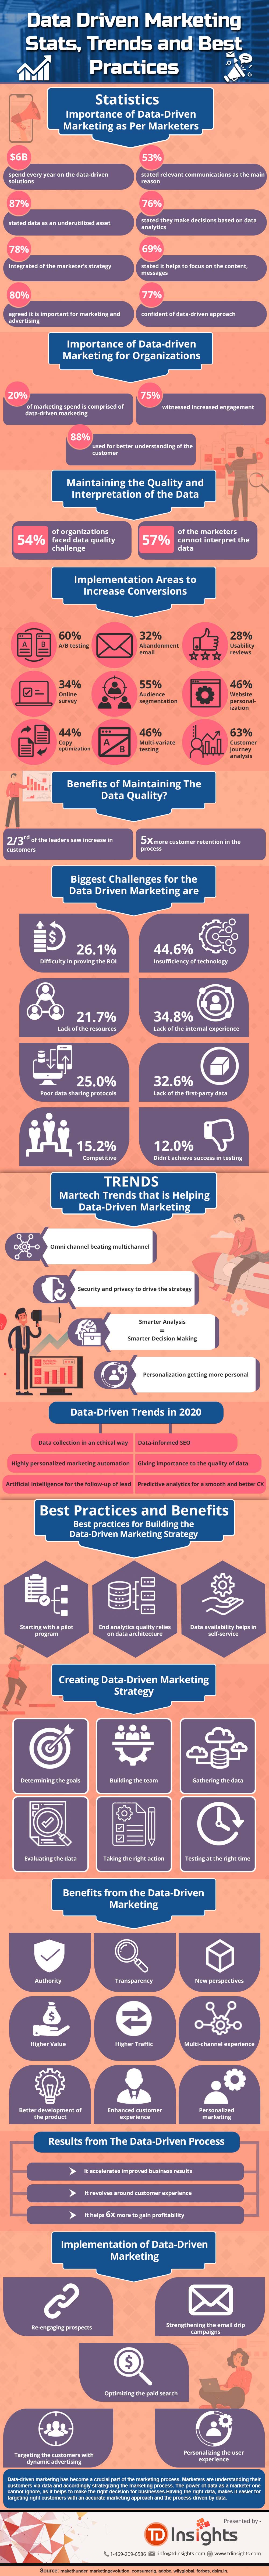 Data-Driven Marketing: Stats, Trends, and Practices [Infographic]
